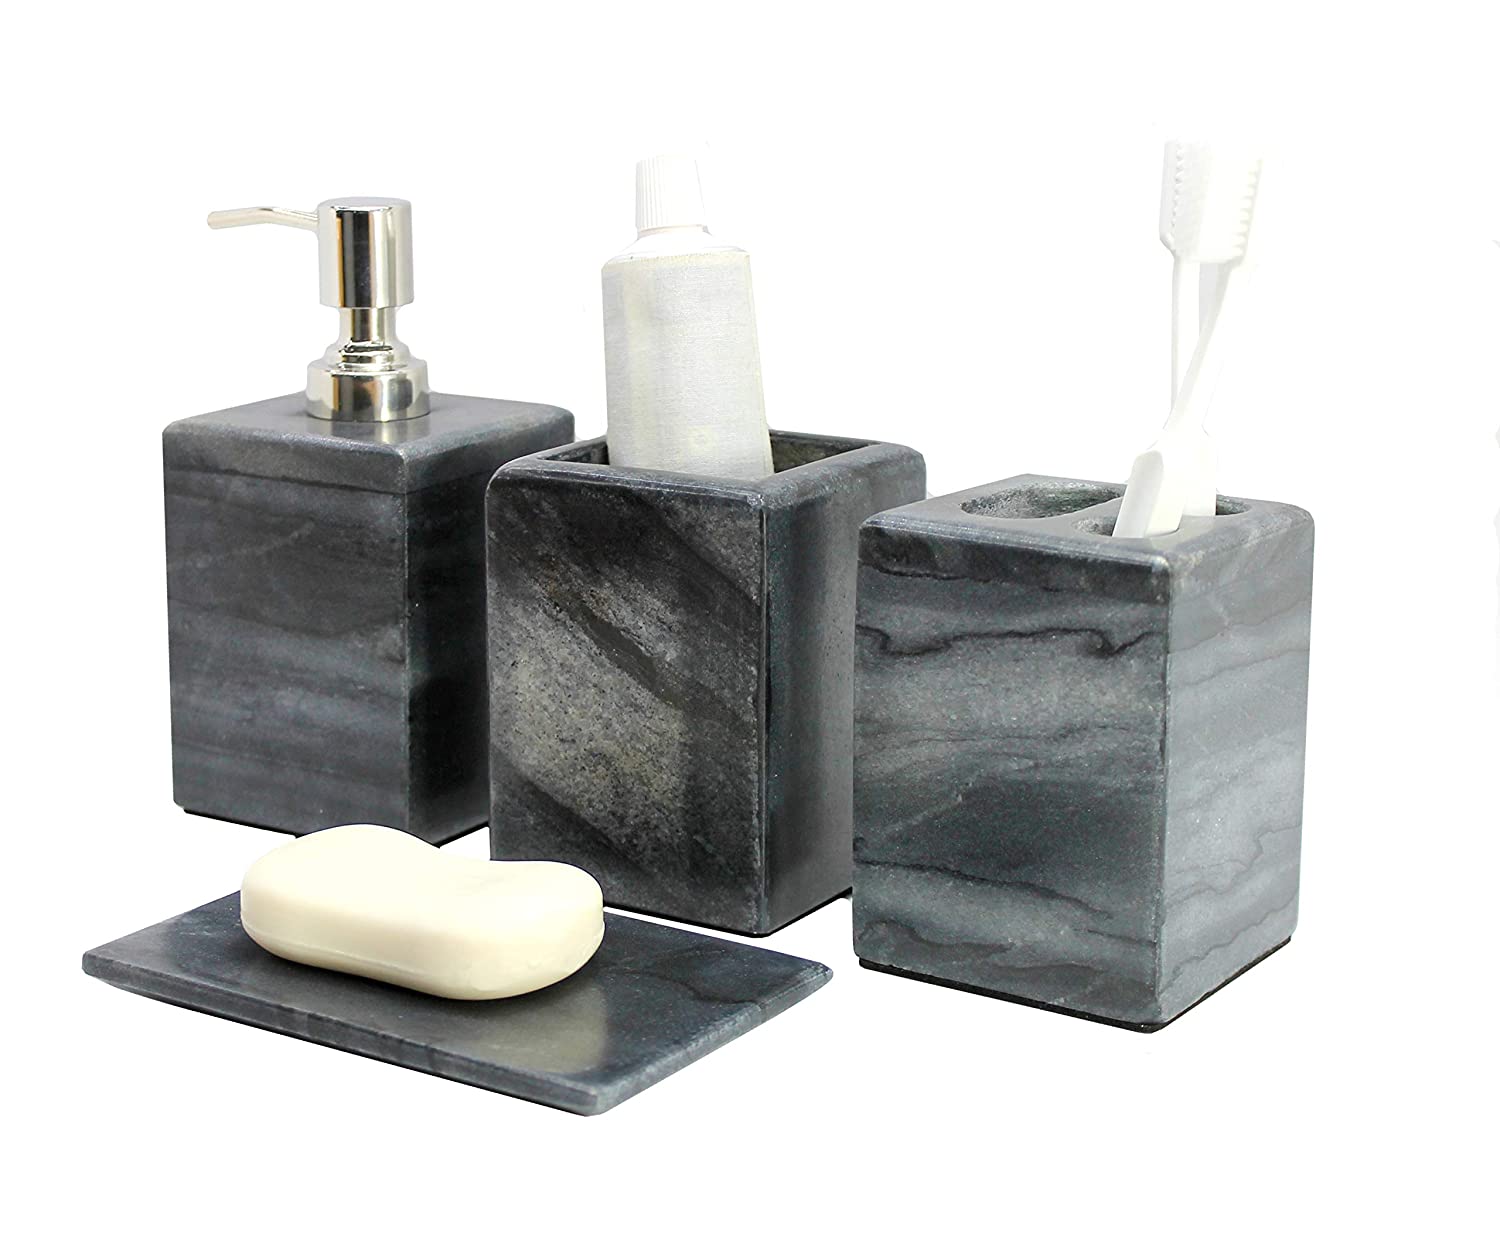 KLEO - Bathroom Accessory Set Made from Natural Stone - Bath Accessories Set  of 4 Includes Soap Dispenser, Toothbrush Holder, Utility and Soap Dish -  StonKraft